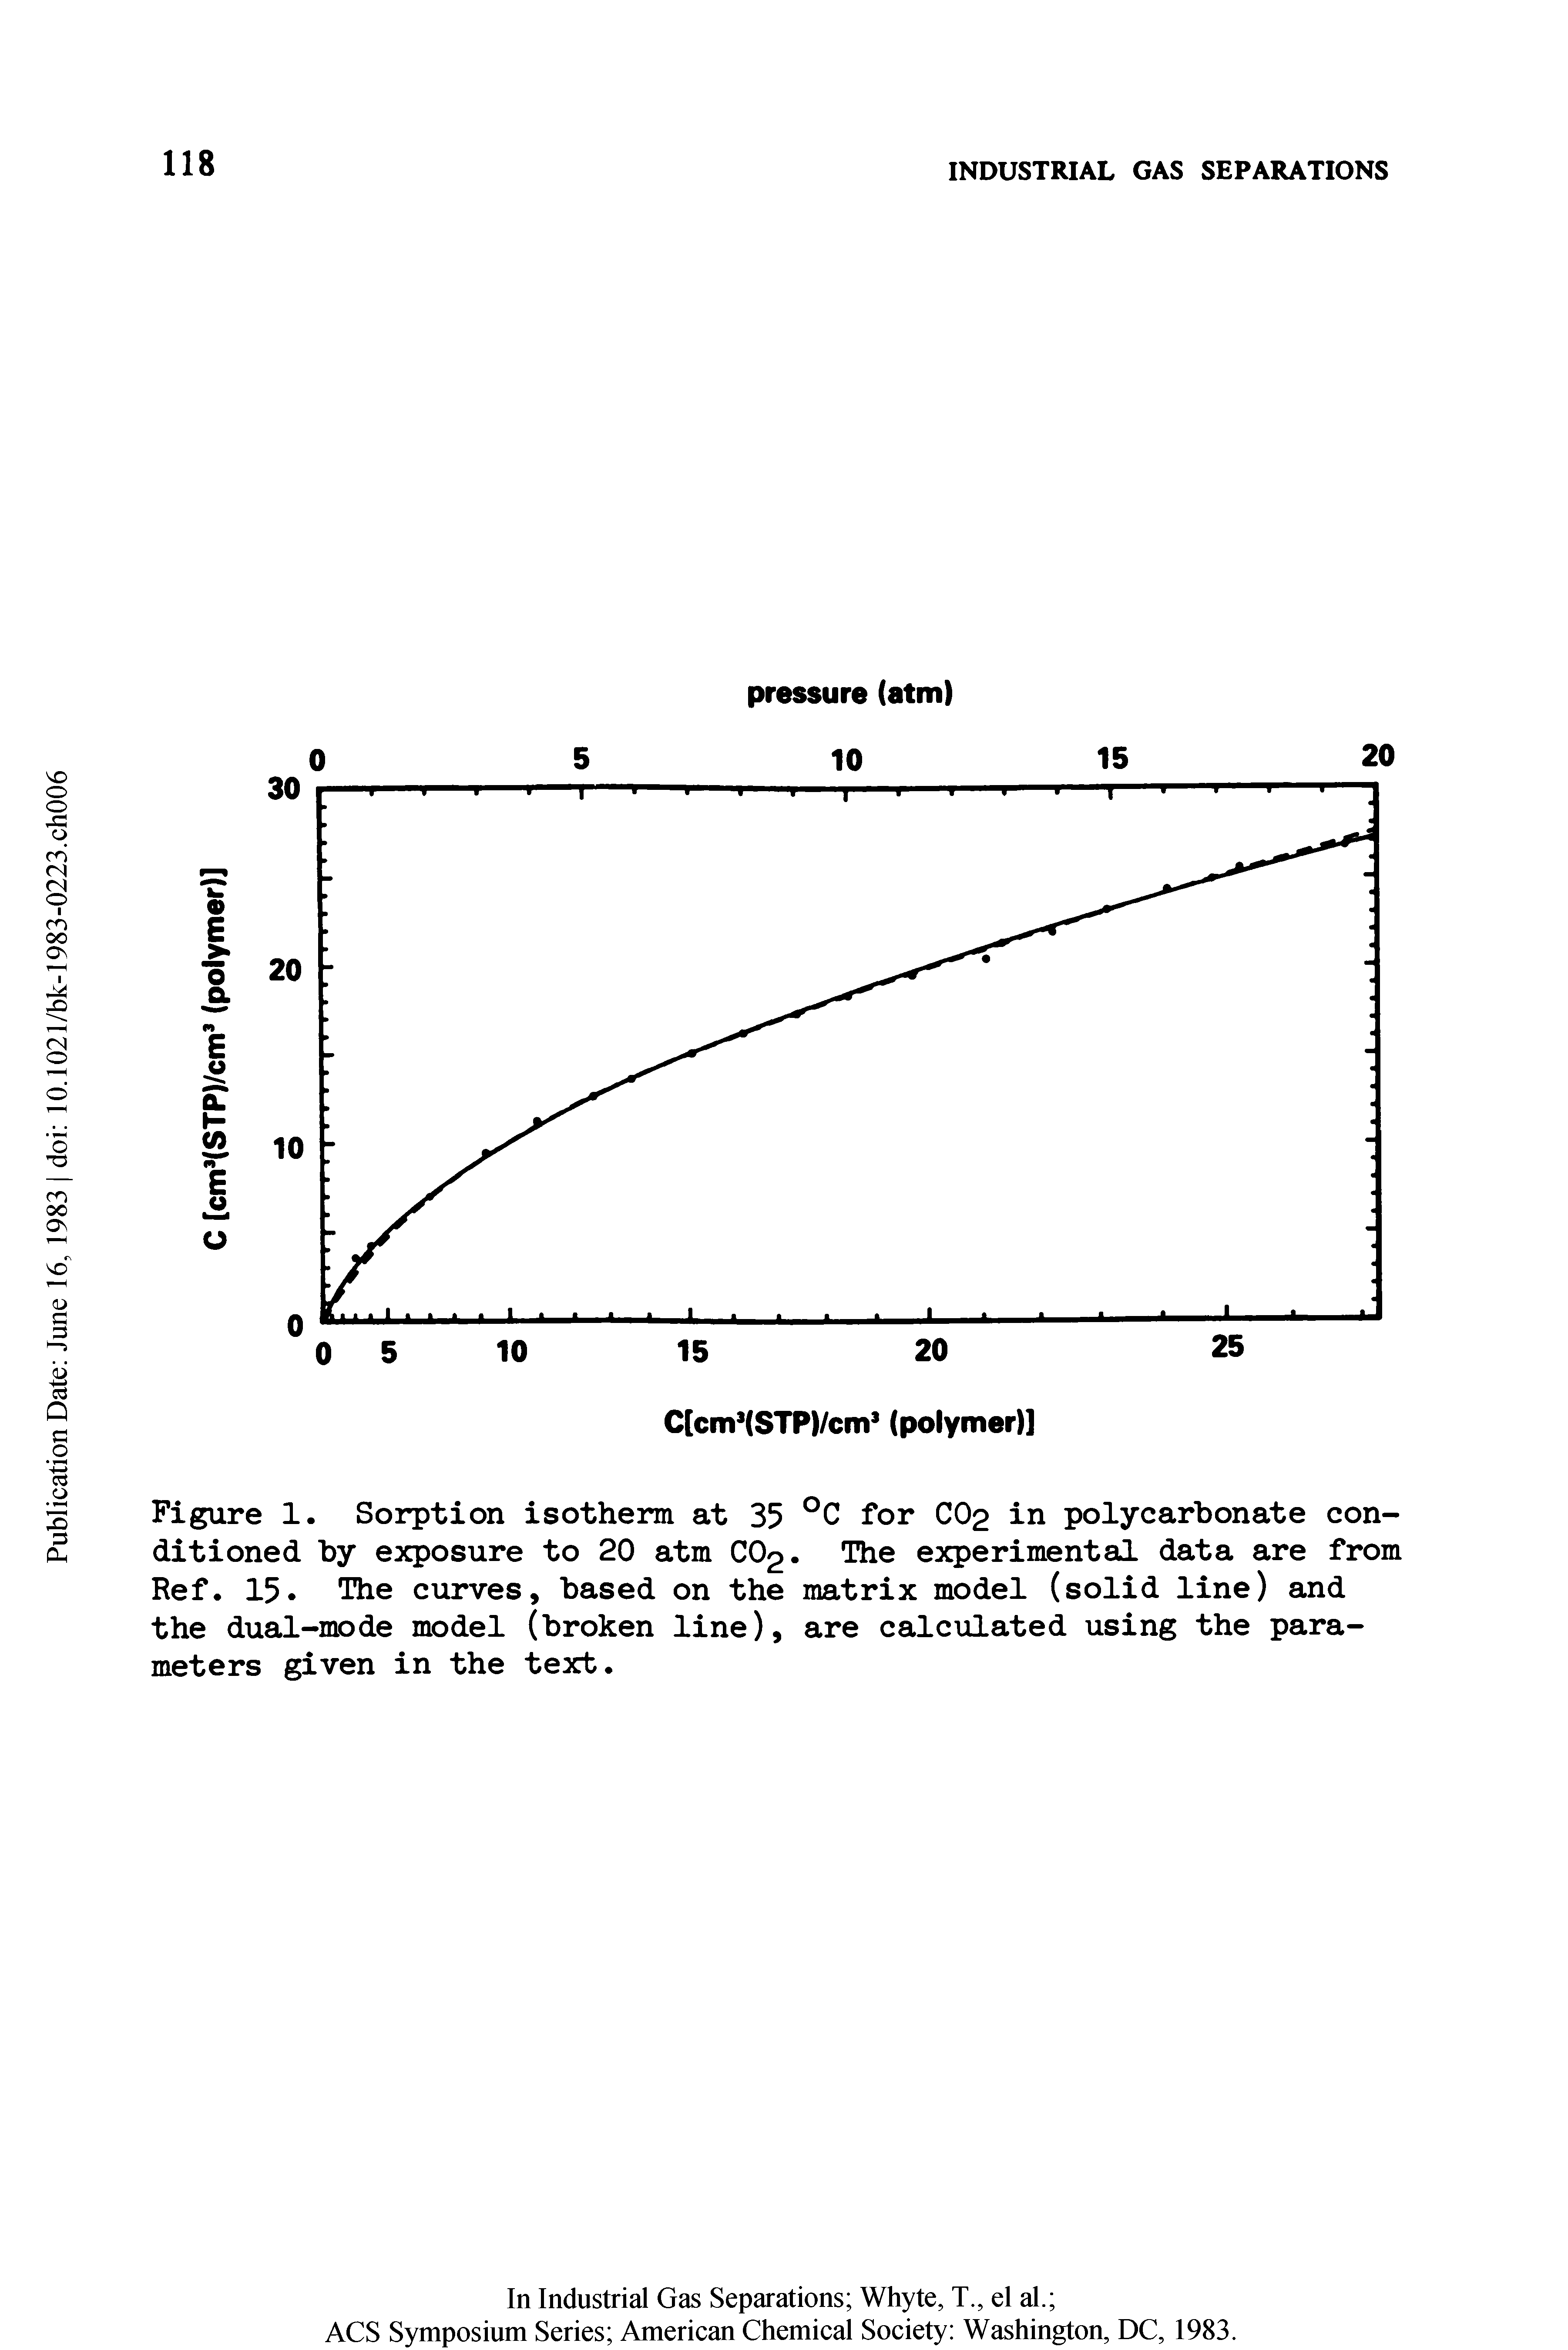 Figure 1. Sorption isotherm at 35 °C for CO2 in polycarbonate conditioned by exposure to 20 atm CO2. The experimental data are from Ref. 15. The curves, based on the matrix model (solid line) and the dual-mode model (broken line), are calculated using the parameters given in the text.